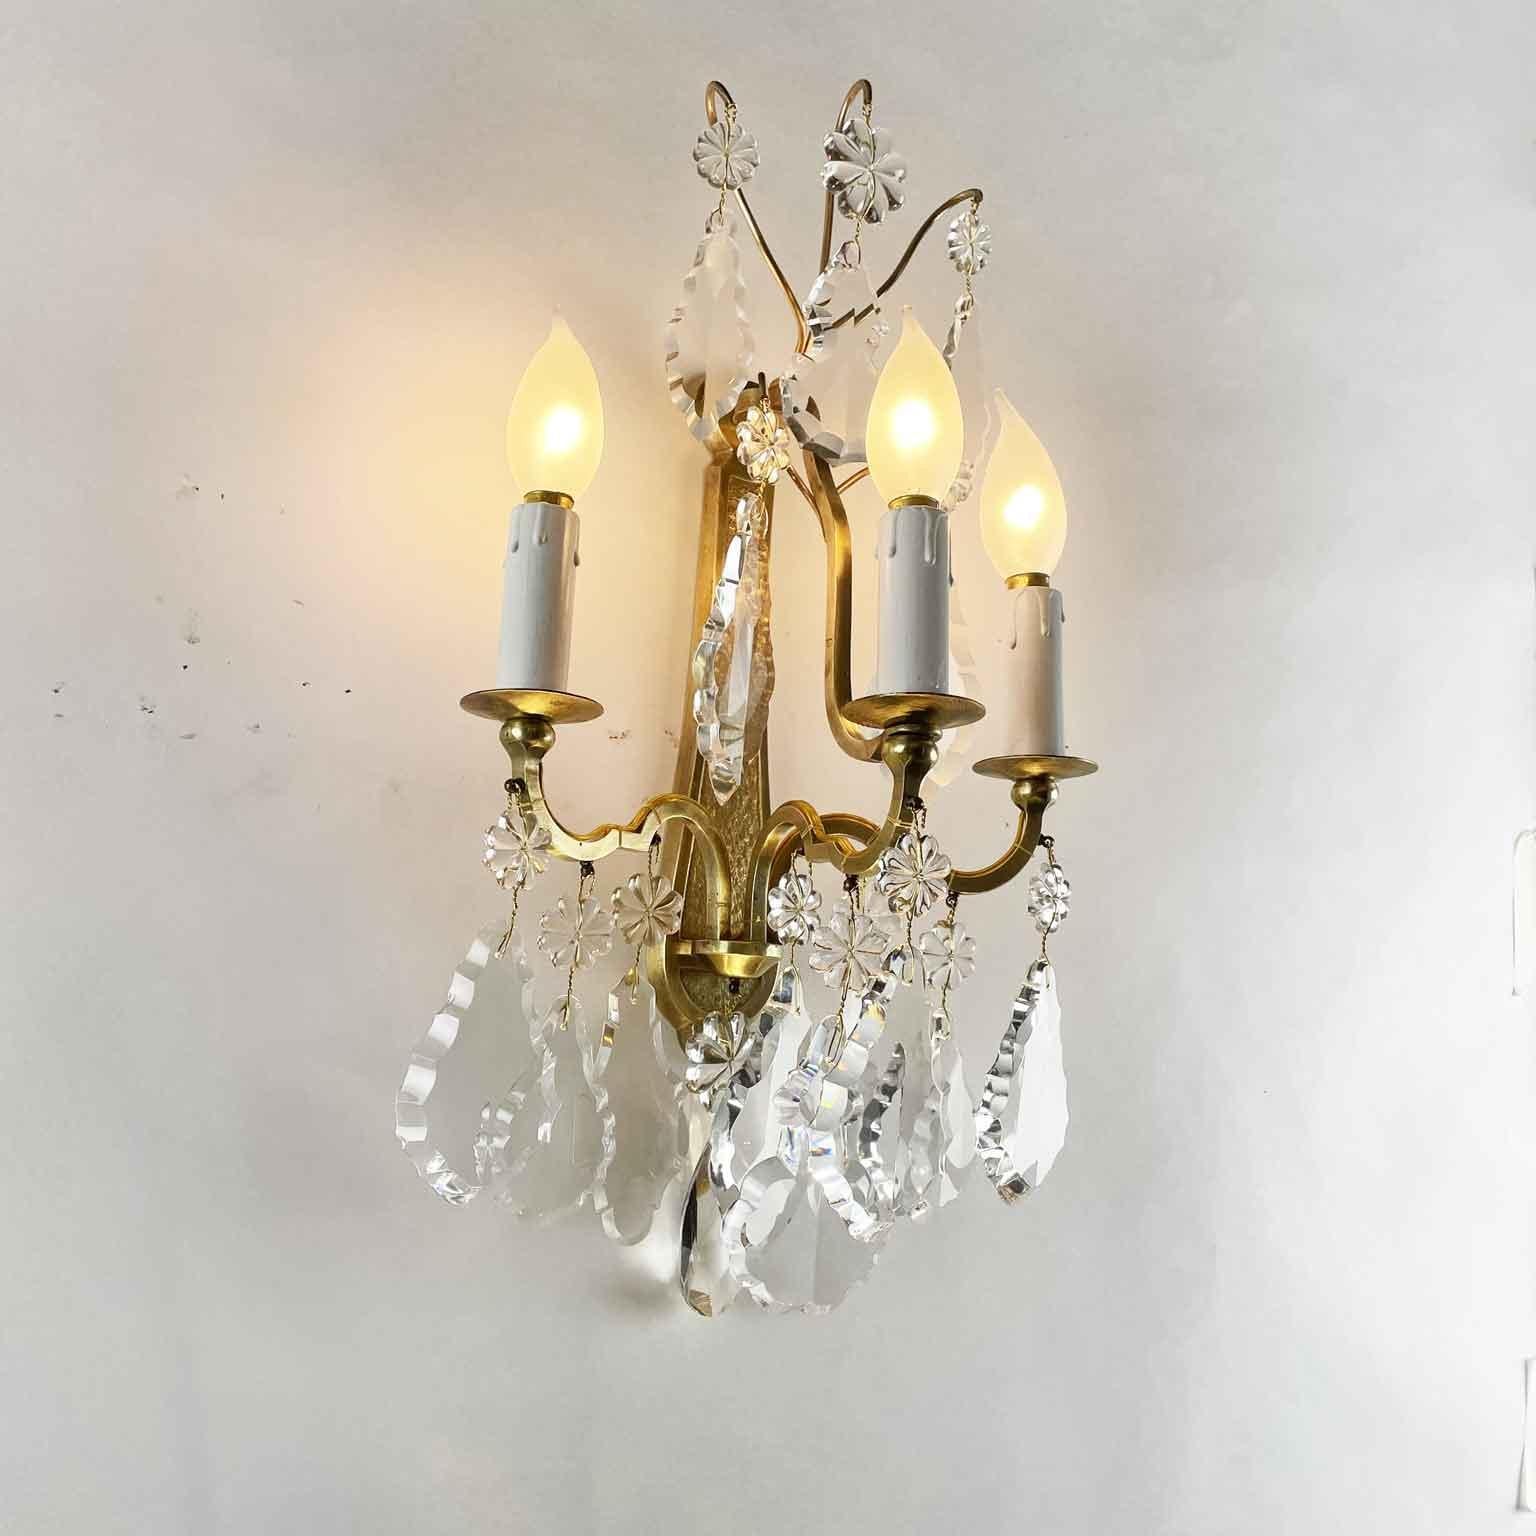 Set of Four Baccarat Crystal Sconces 20th Century French Gilt Wall Lights 4